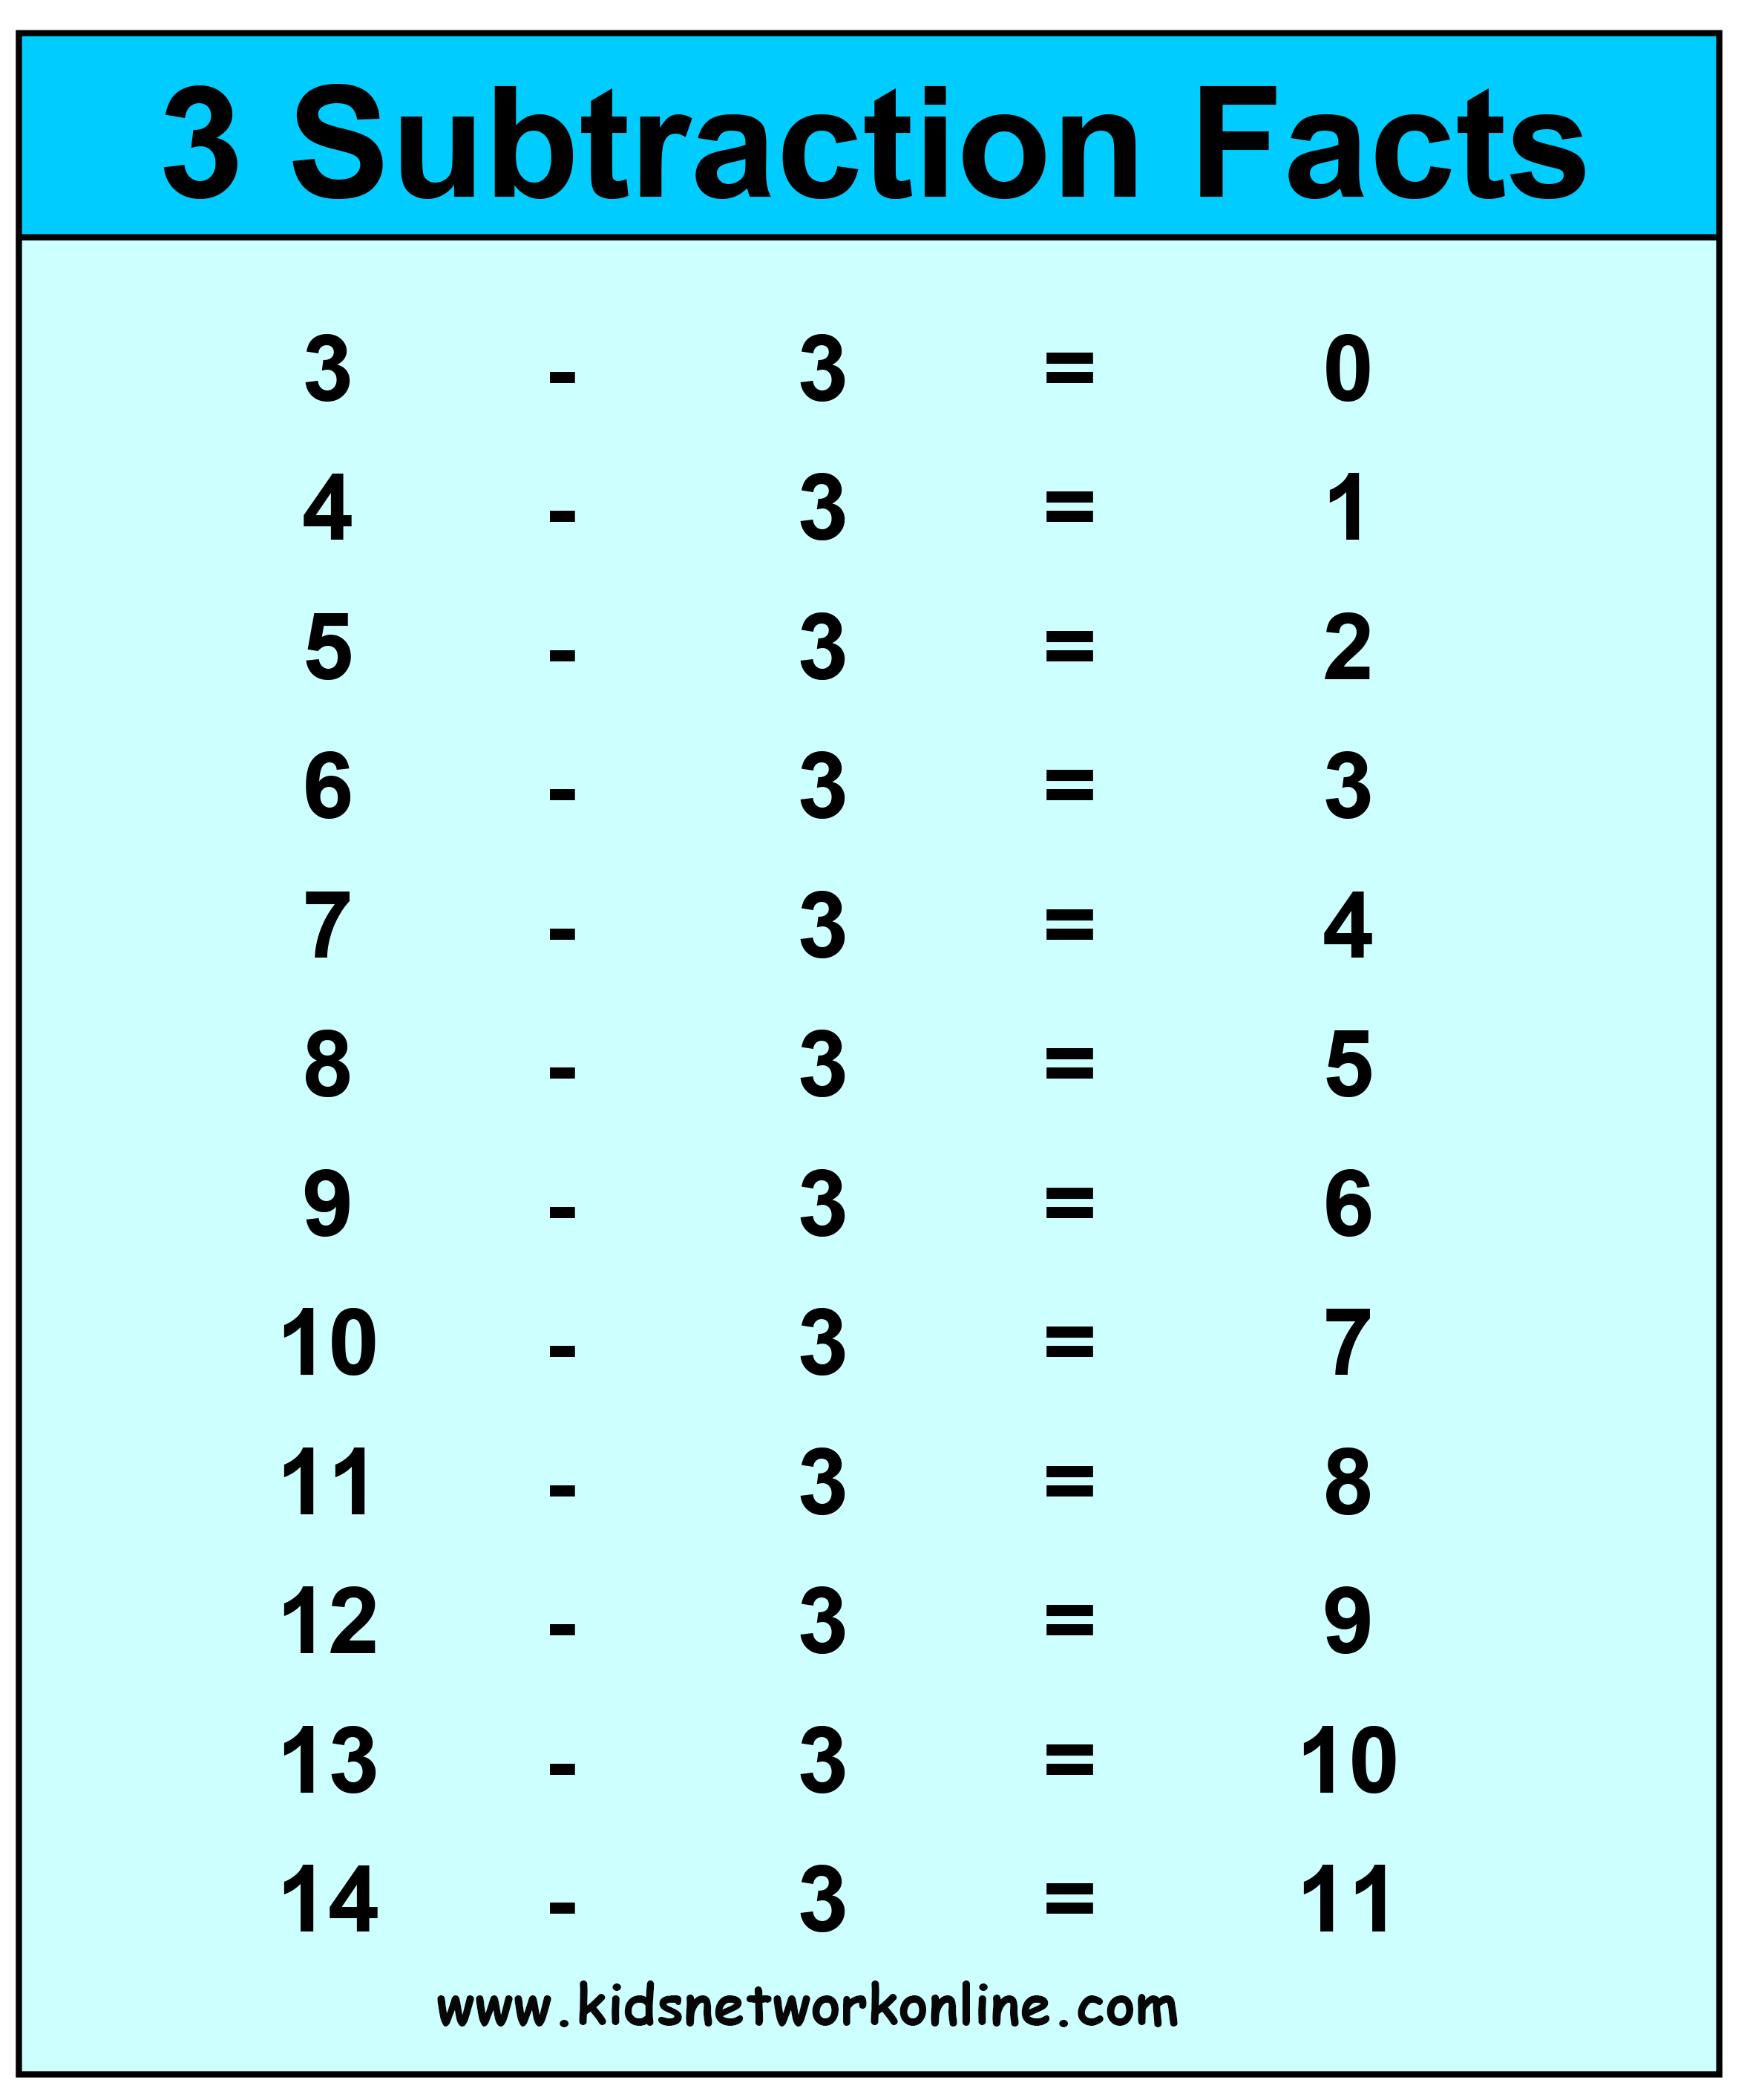 Subtraction-Flashcards